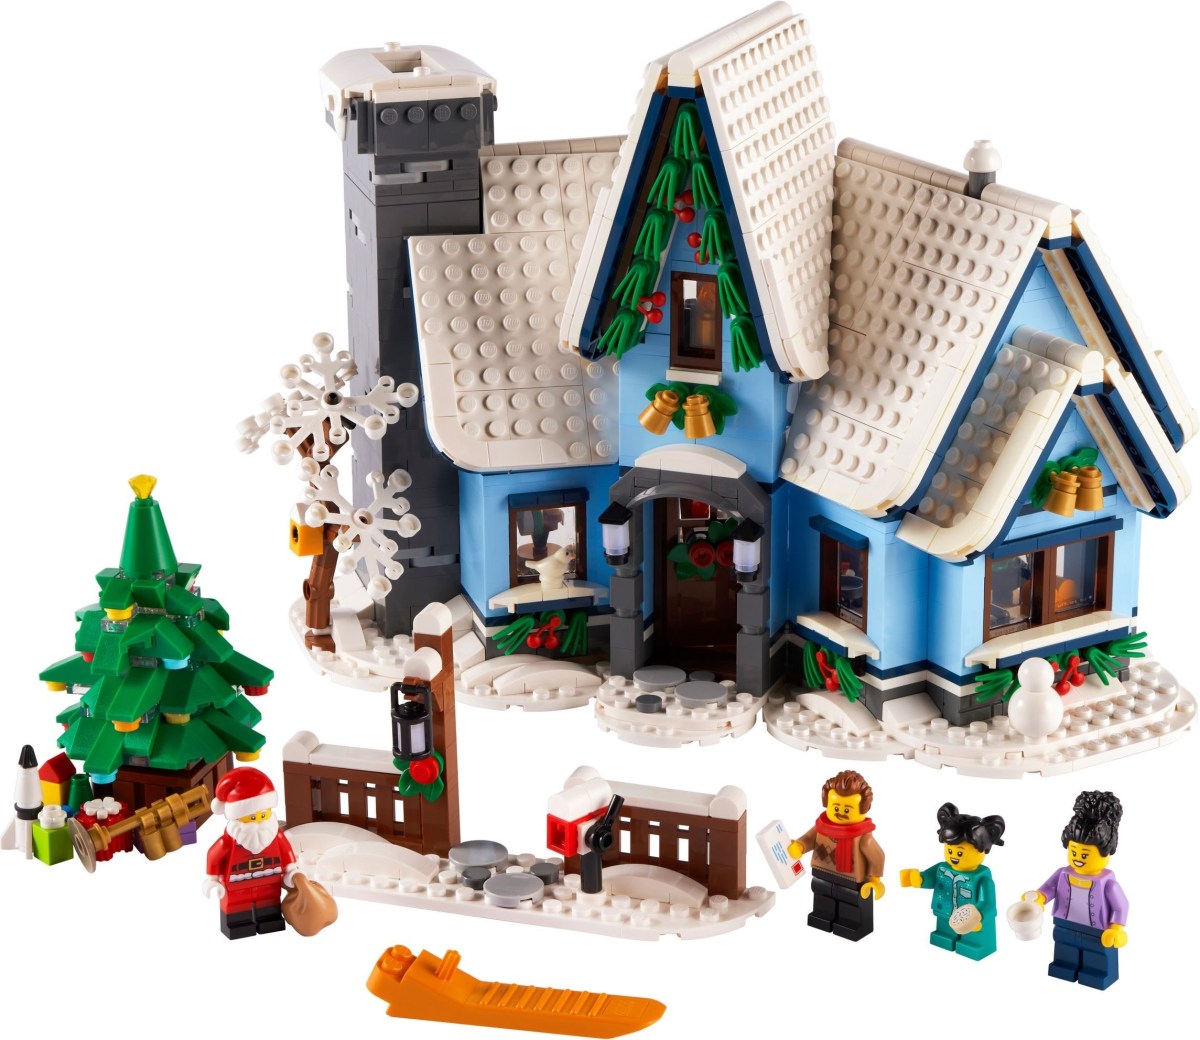 LEGO Santa’s Visit (10293) Seasonal Set Now VIP-Available Ahead of October Release